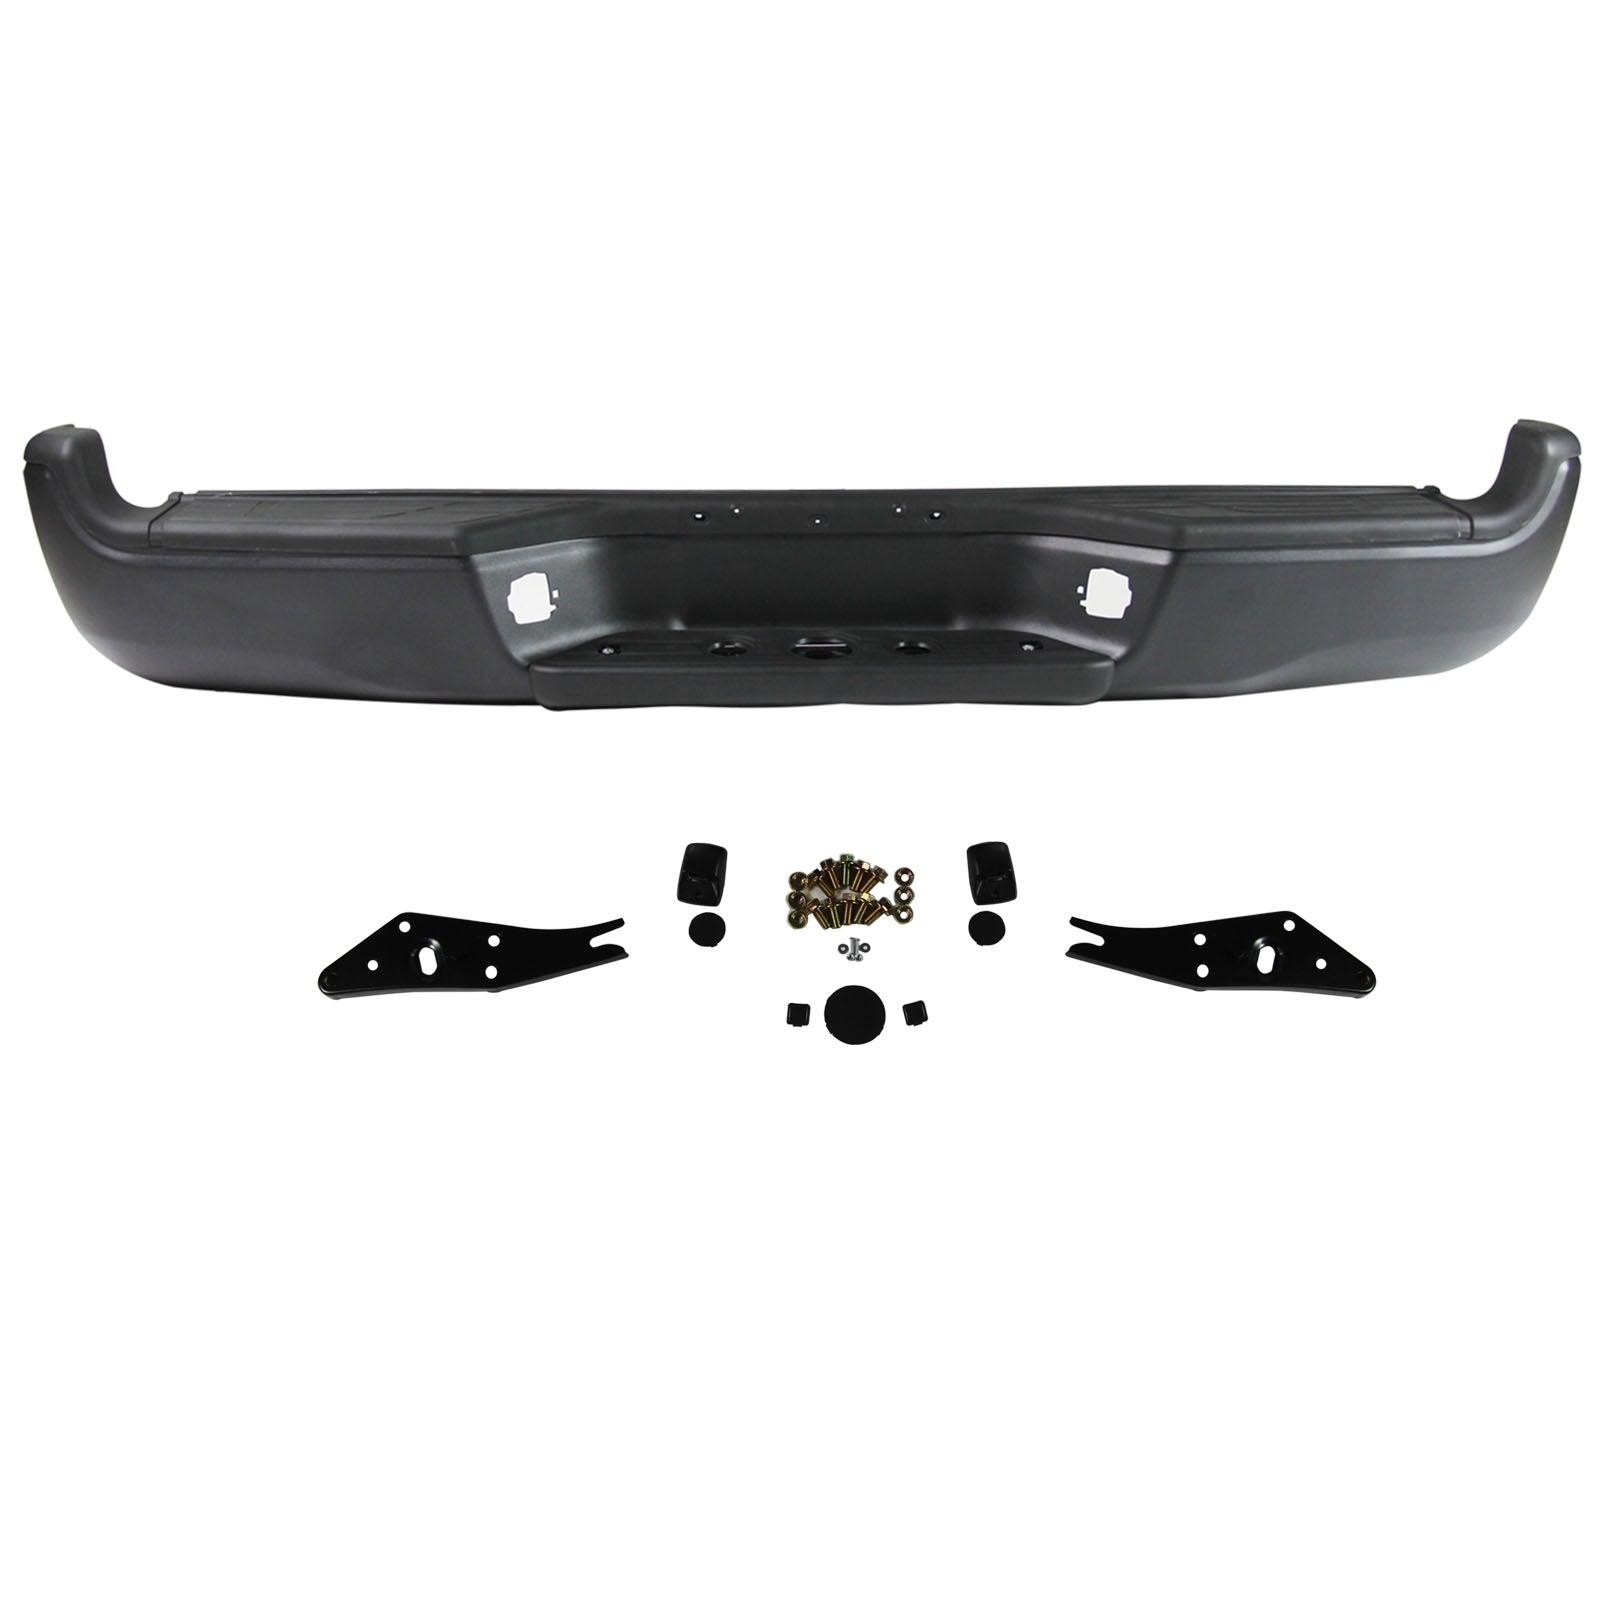 NEW Primered - Complete Rear Steel Step Bumper for 2005-2015 Toyota Tacoma 05-15 (Fits: Tacoma) TO1103114 - Goodmatchup